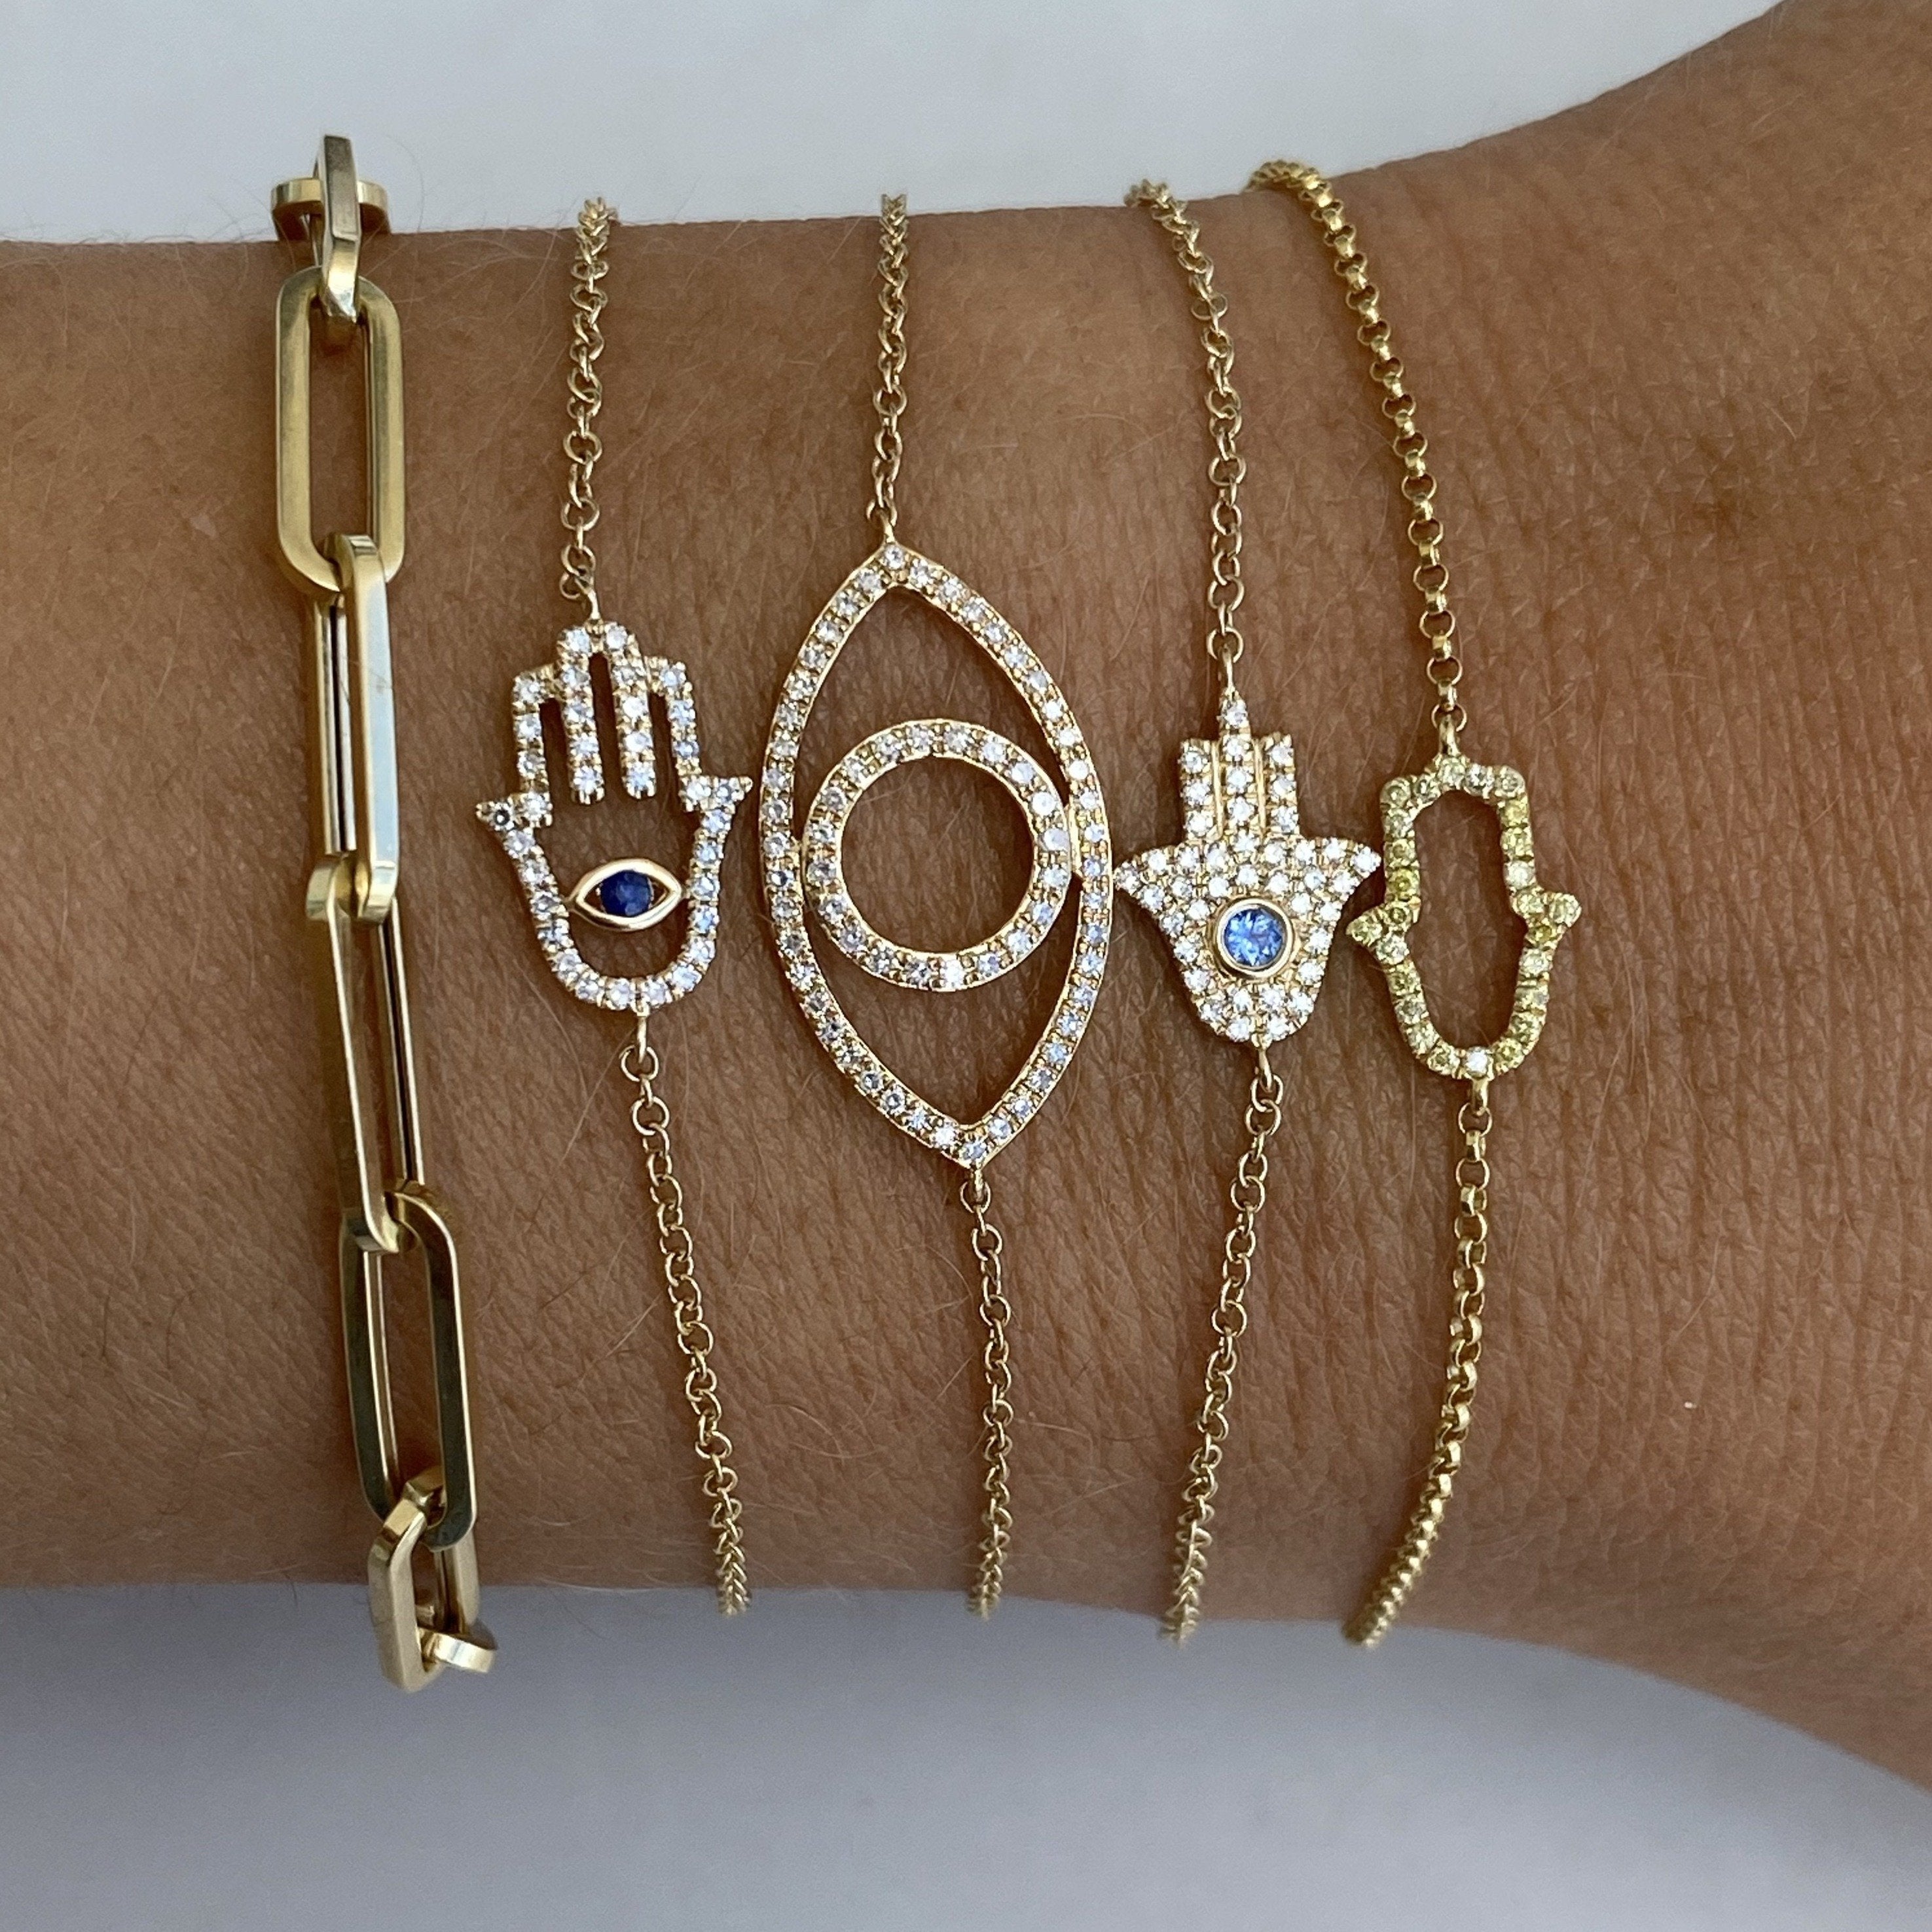 Hamsa Hand Bracelet With Clear Crystal Stones | Bico Las Vegas | | Fasion  Jewelry & Accesories For Everyone